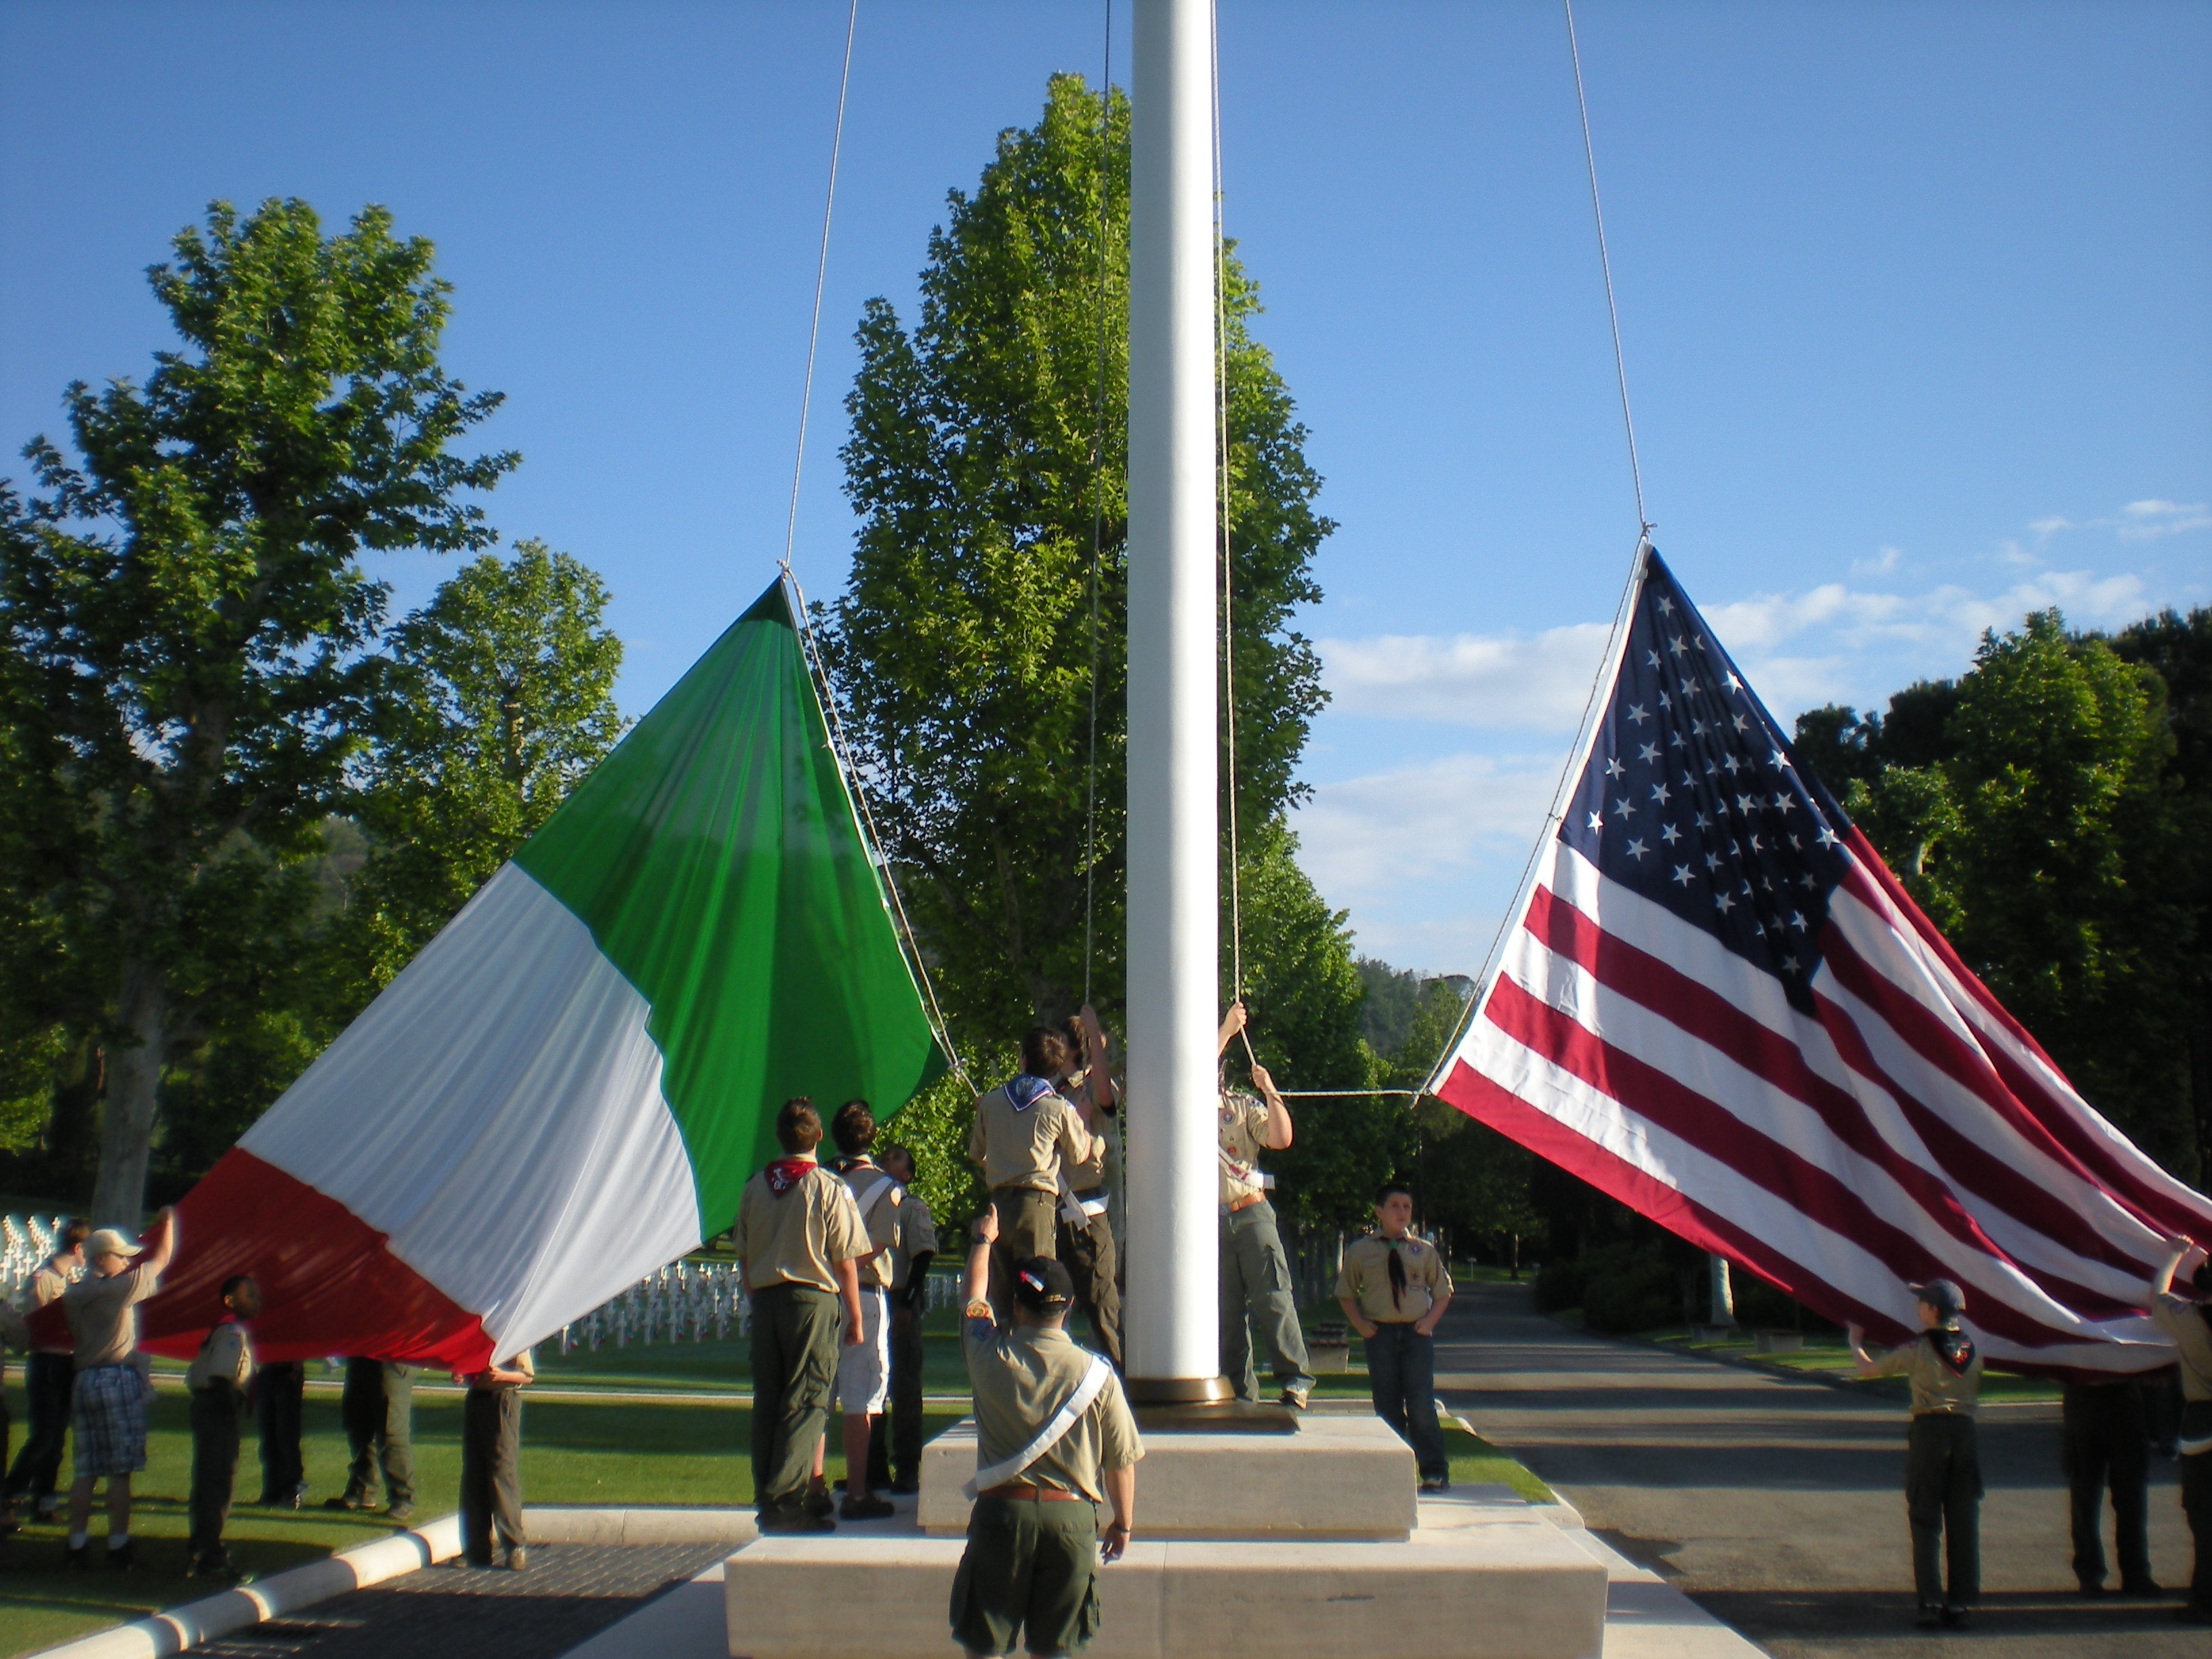 Boy Scouts raise large Italian and American flags on a flag pole.